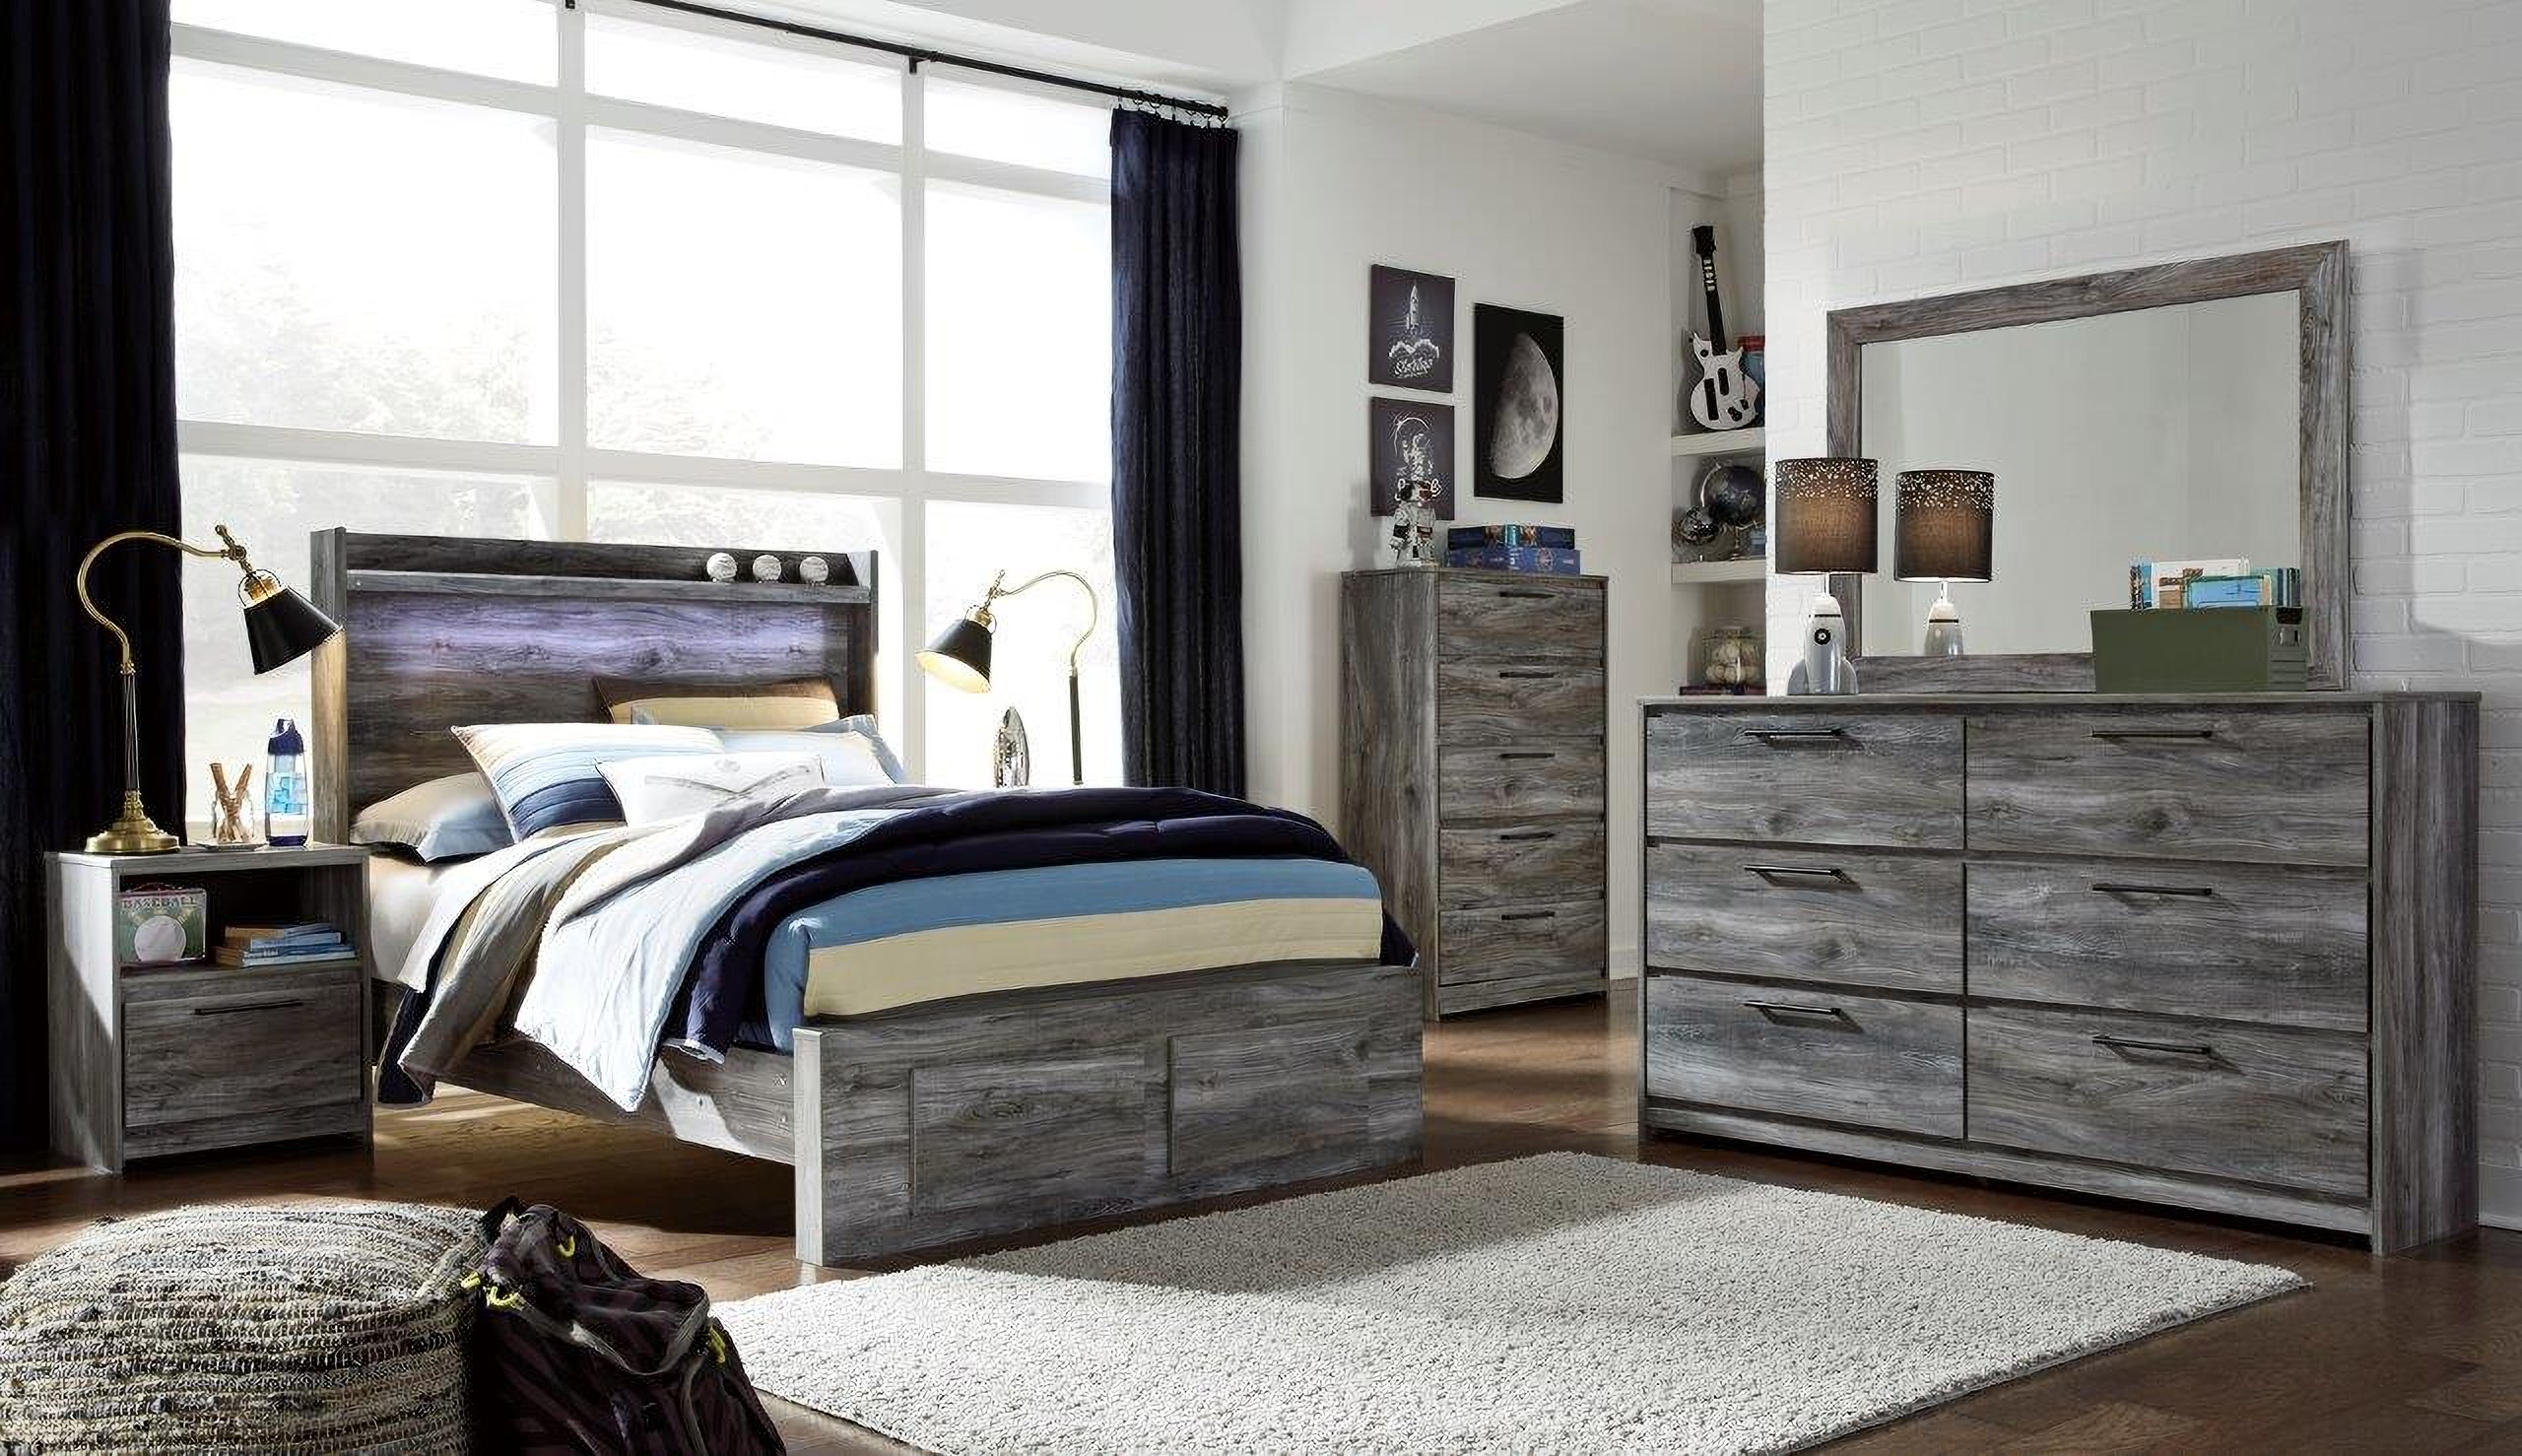 MARWICK 4-PC BEDROOM SET - QUEEN available at Complete Suite